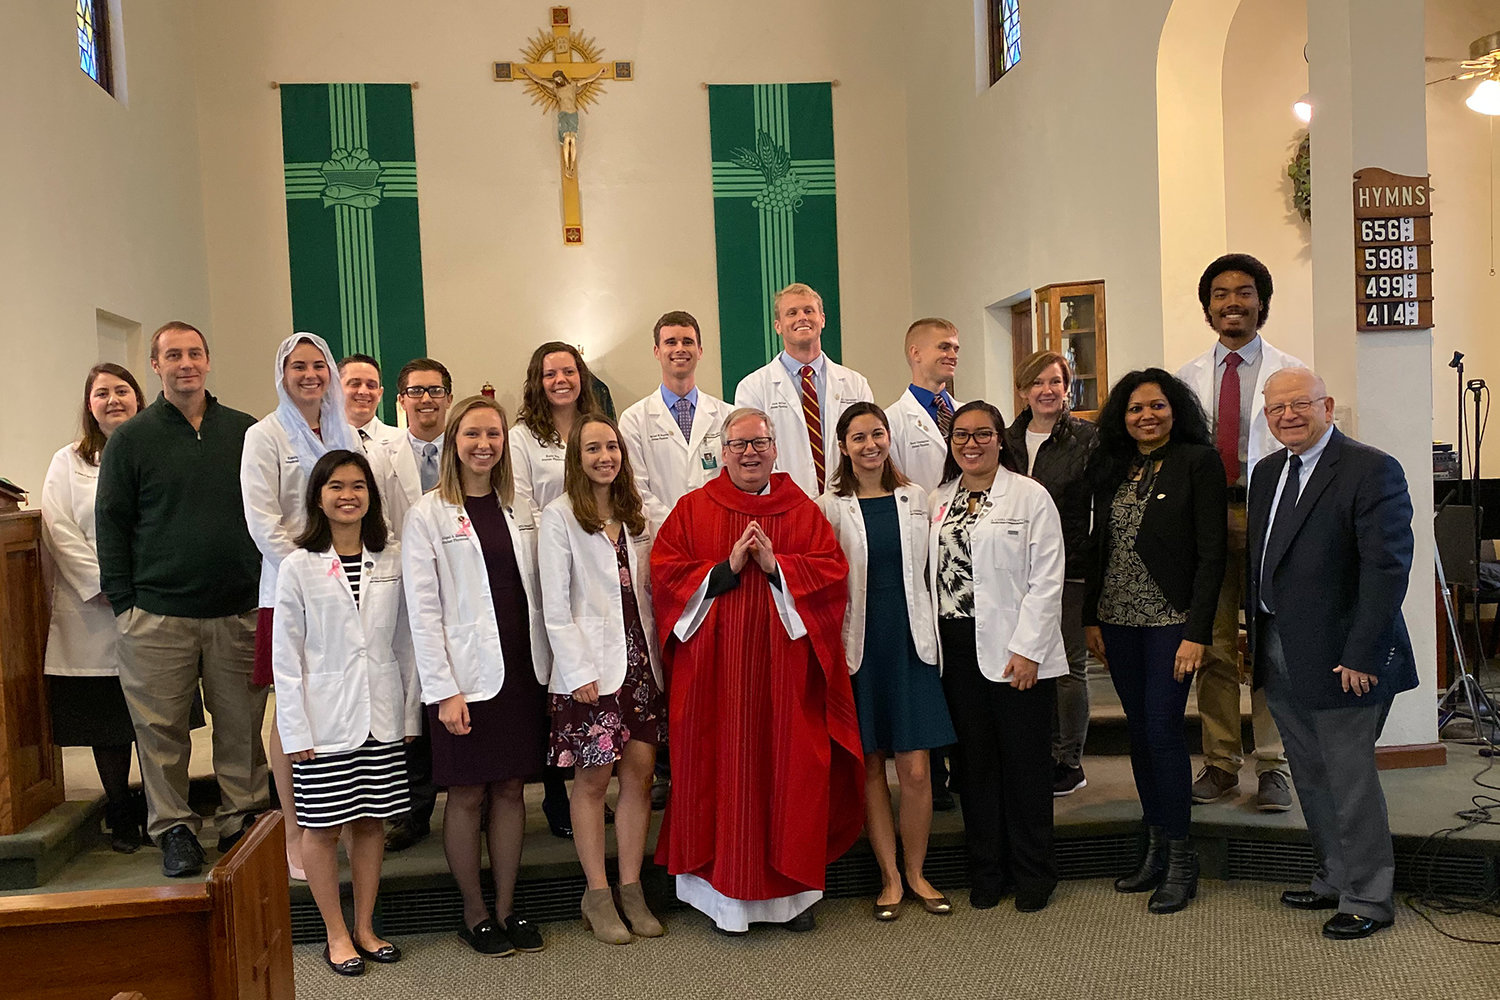 Members of the Catholic Student Association at A.T. Still University of Health Sciences and of Mary Immaculate parish in Kirksville join Monsignor David Cox, pastor, in a group photo after the inaugural White Mass for medical professionals to be celebrated in Kirksville.